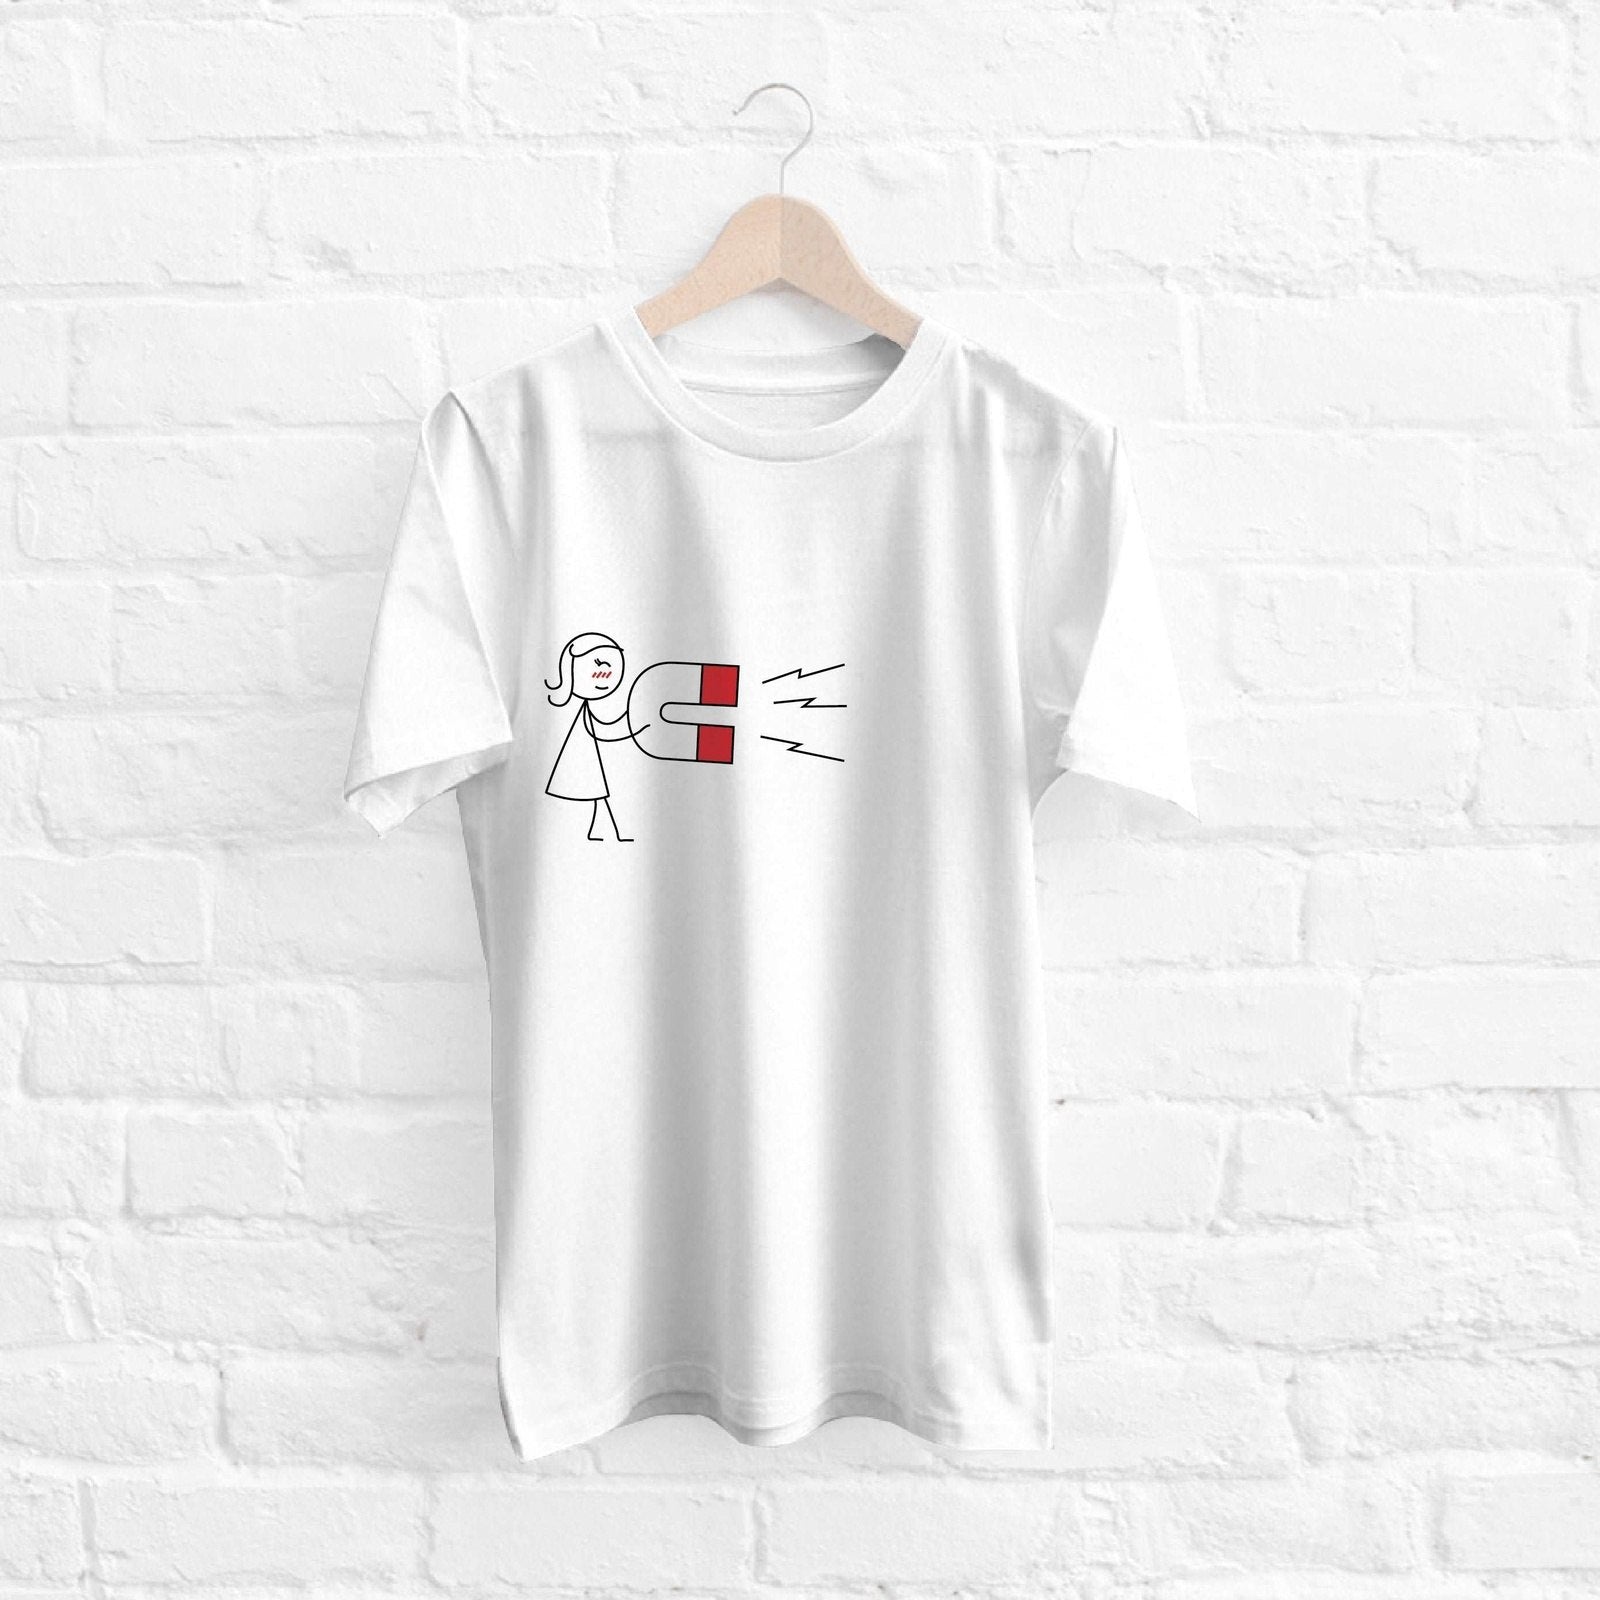 Personalize your wardrobe with a charming white t-shirt adorned with a delightful drawing.